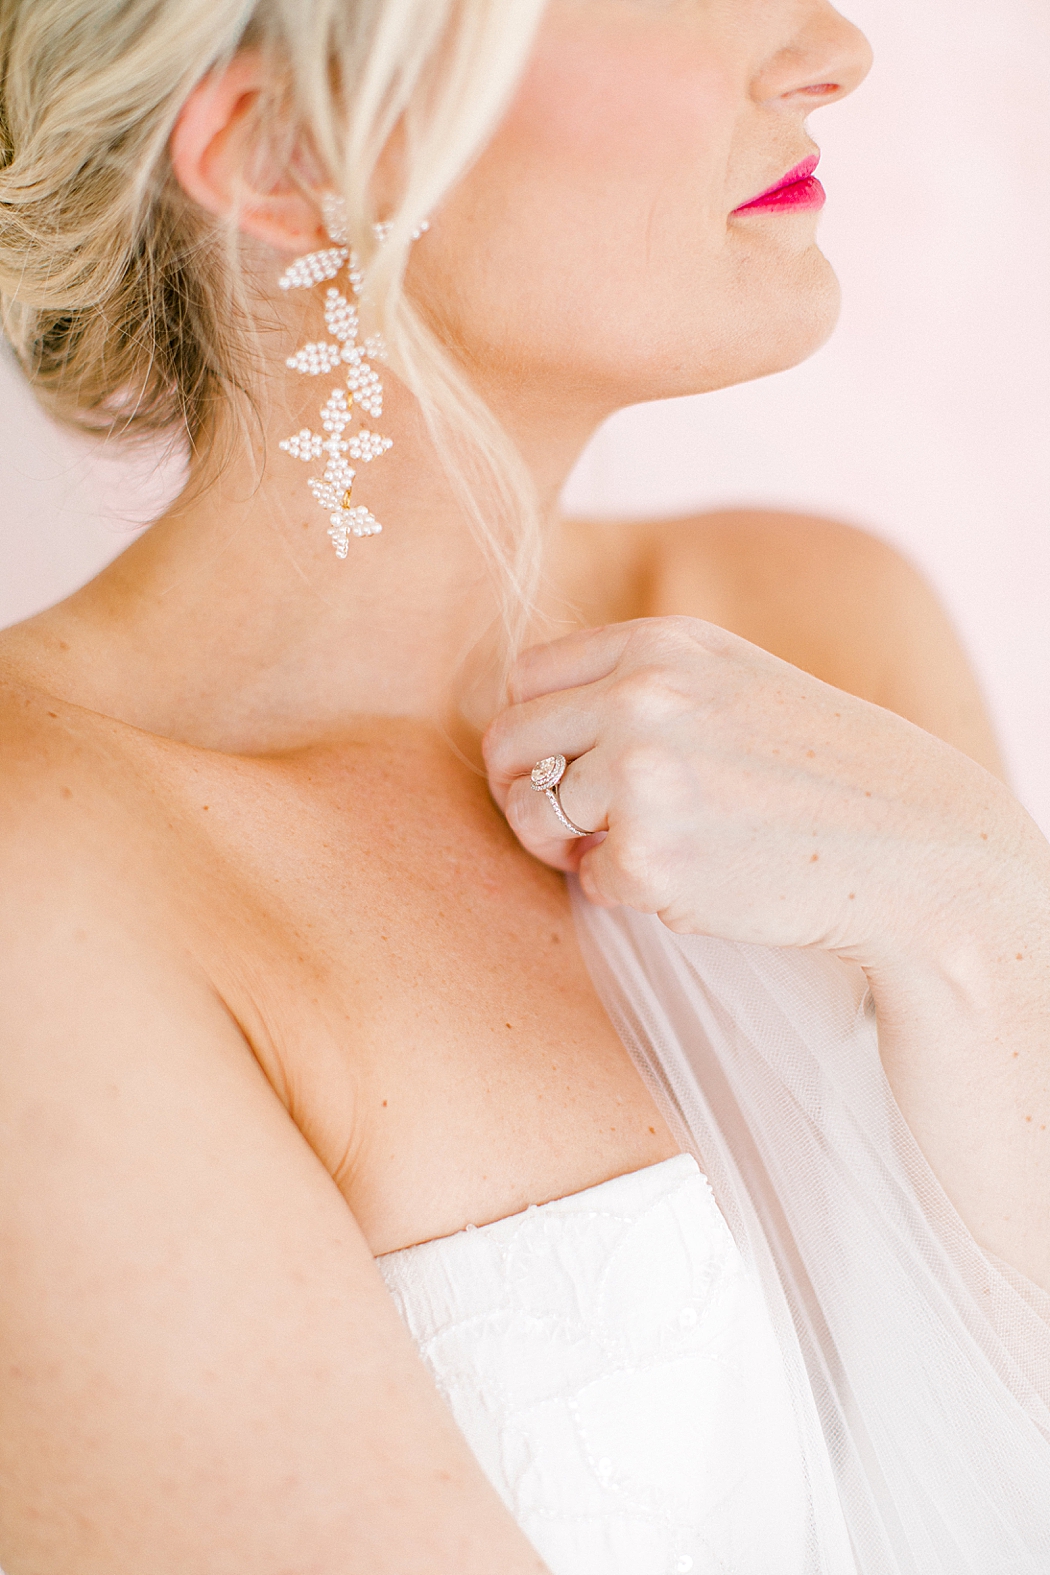 Woodbine Mansion wedding bridal photos by Allison Jeffers Photography in Round Rock Texas 0056